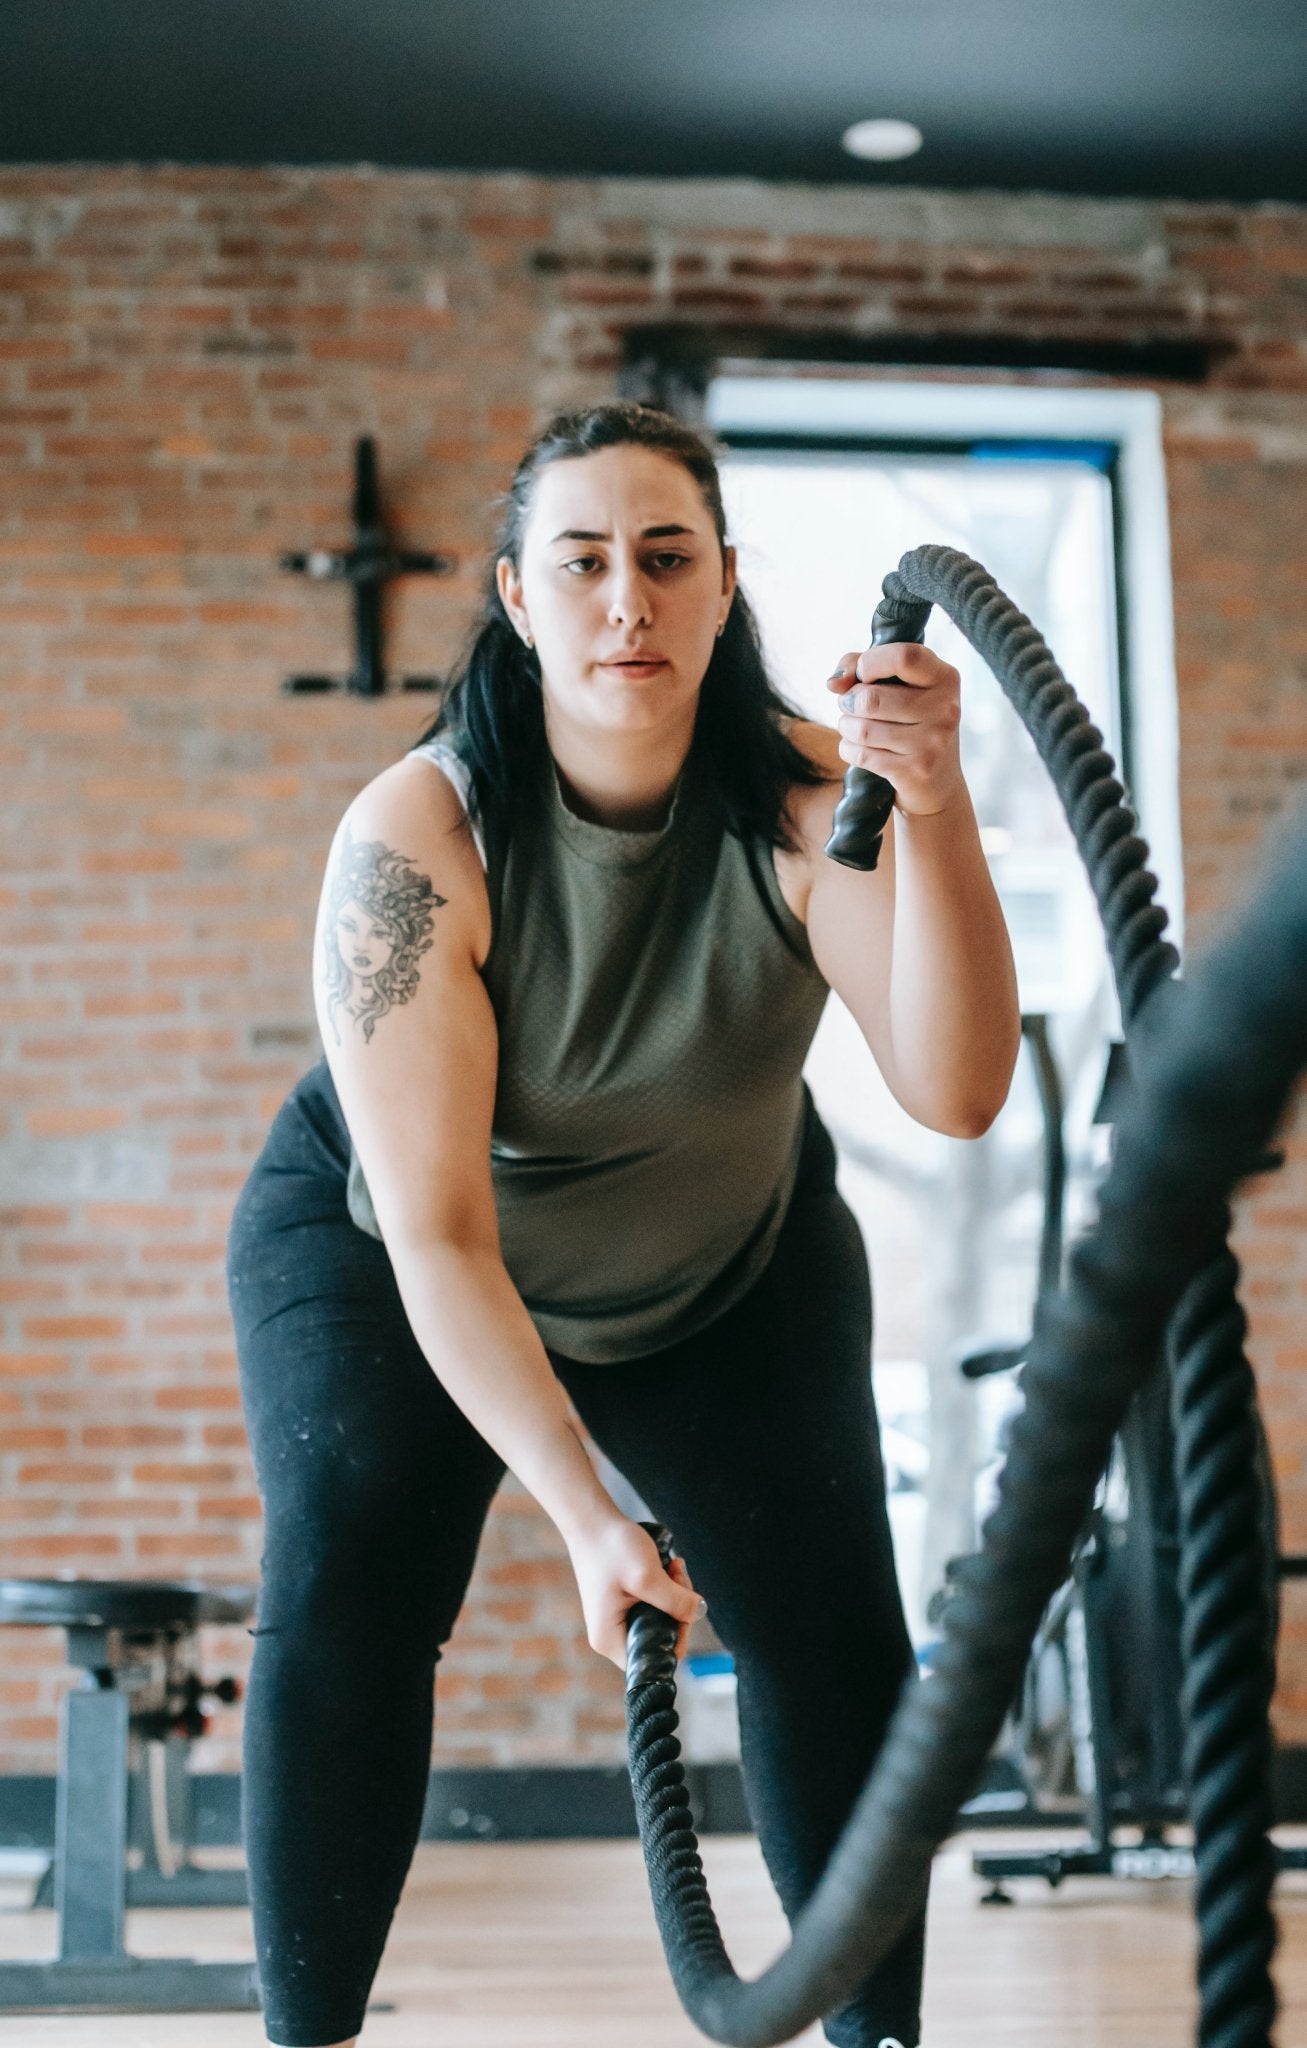 The 5 Effective Ways to Overcome Gym Anxiety - SNO